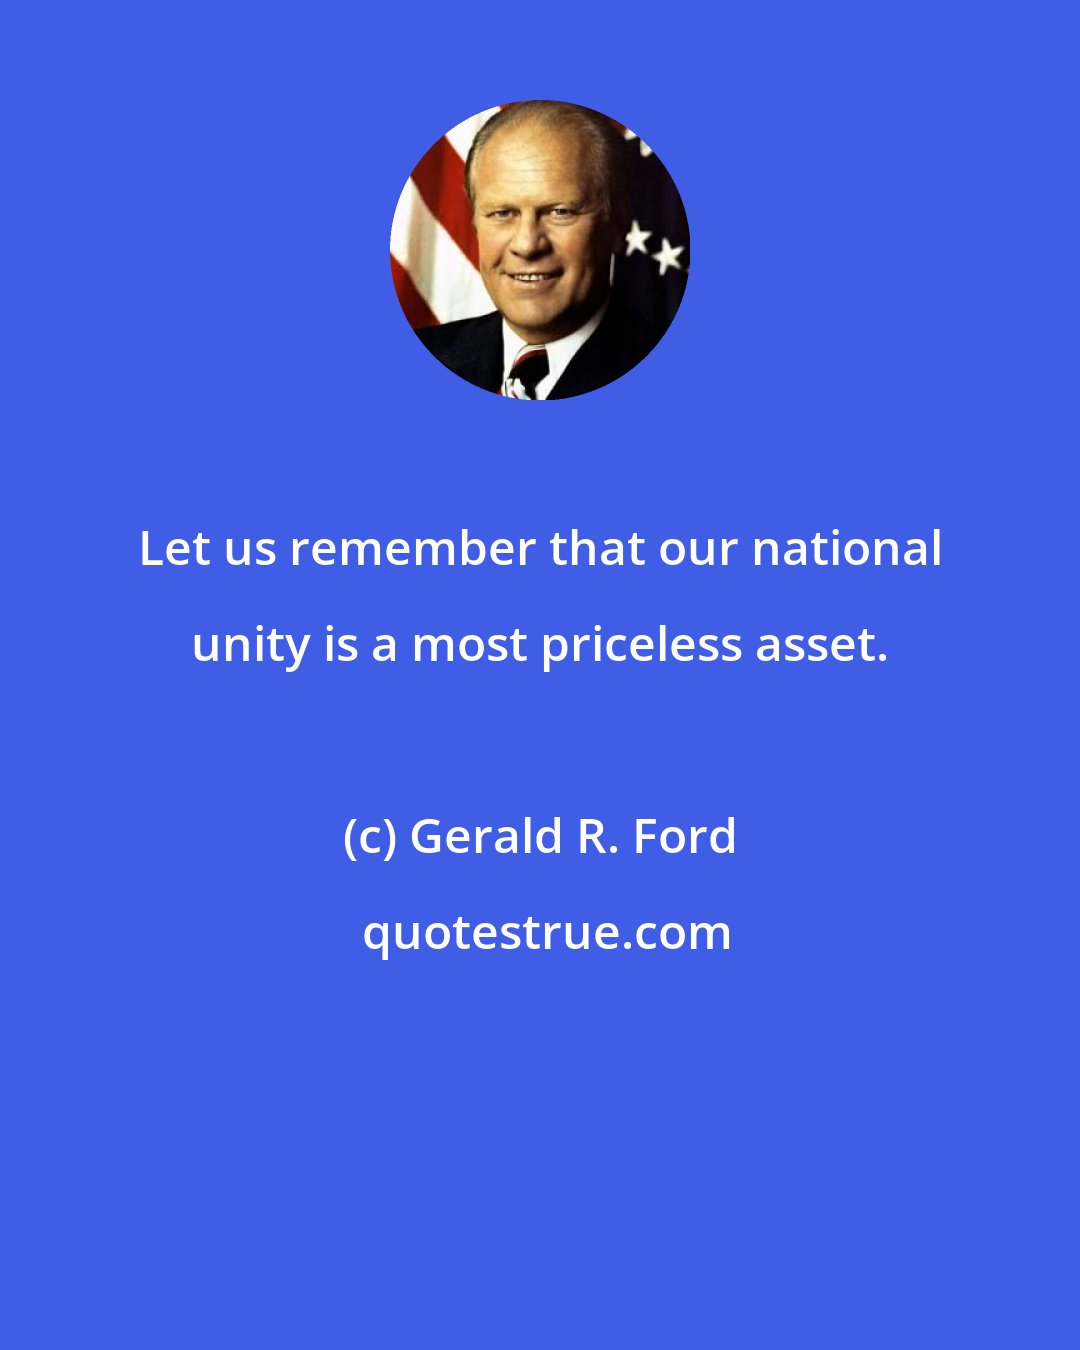 Gerald R. Ford: Let us remember that our national unity is a most priceless asset.